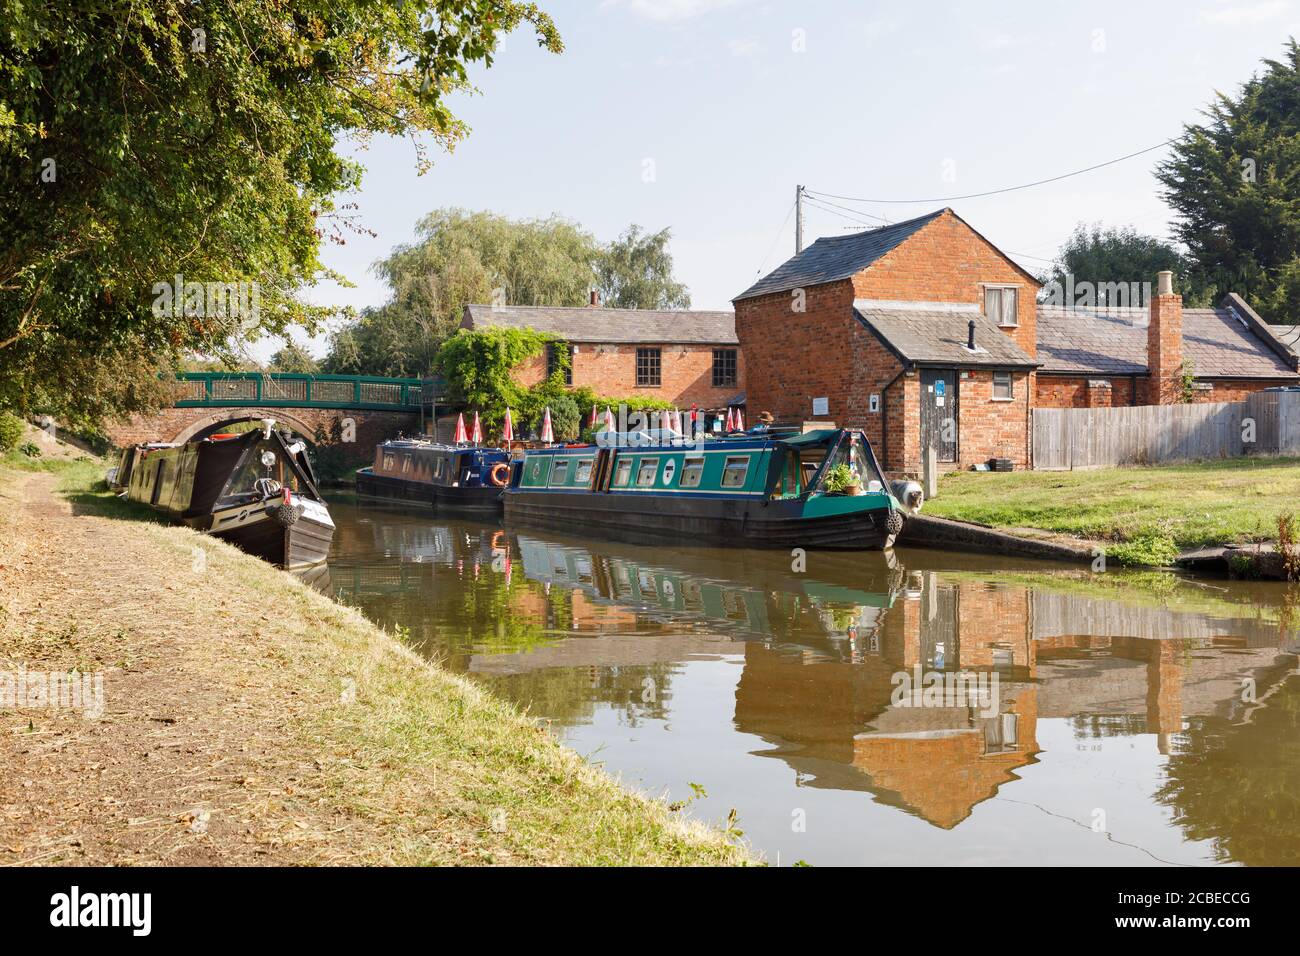 Crick, Northamptonshire, UK - 12/08/20: Narrowboats moored at Crick Wharf on the Grand Union Canal, a popular route for boating holidays. Stock Photo